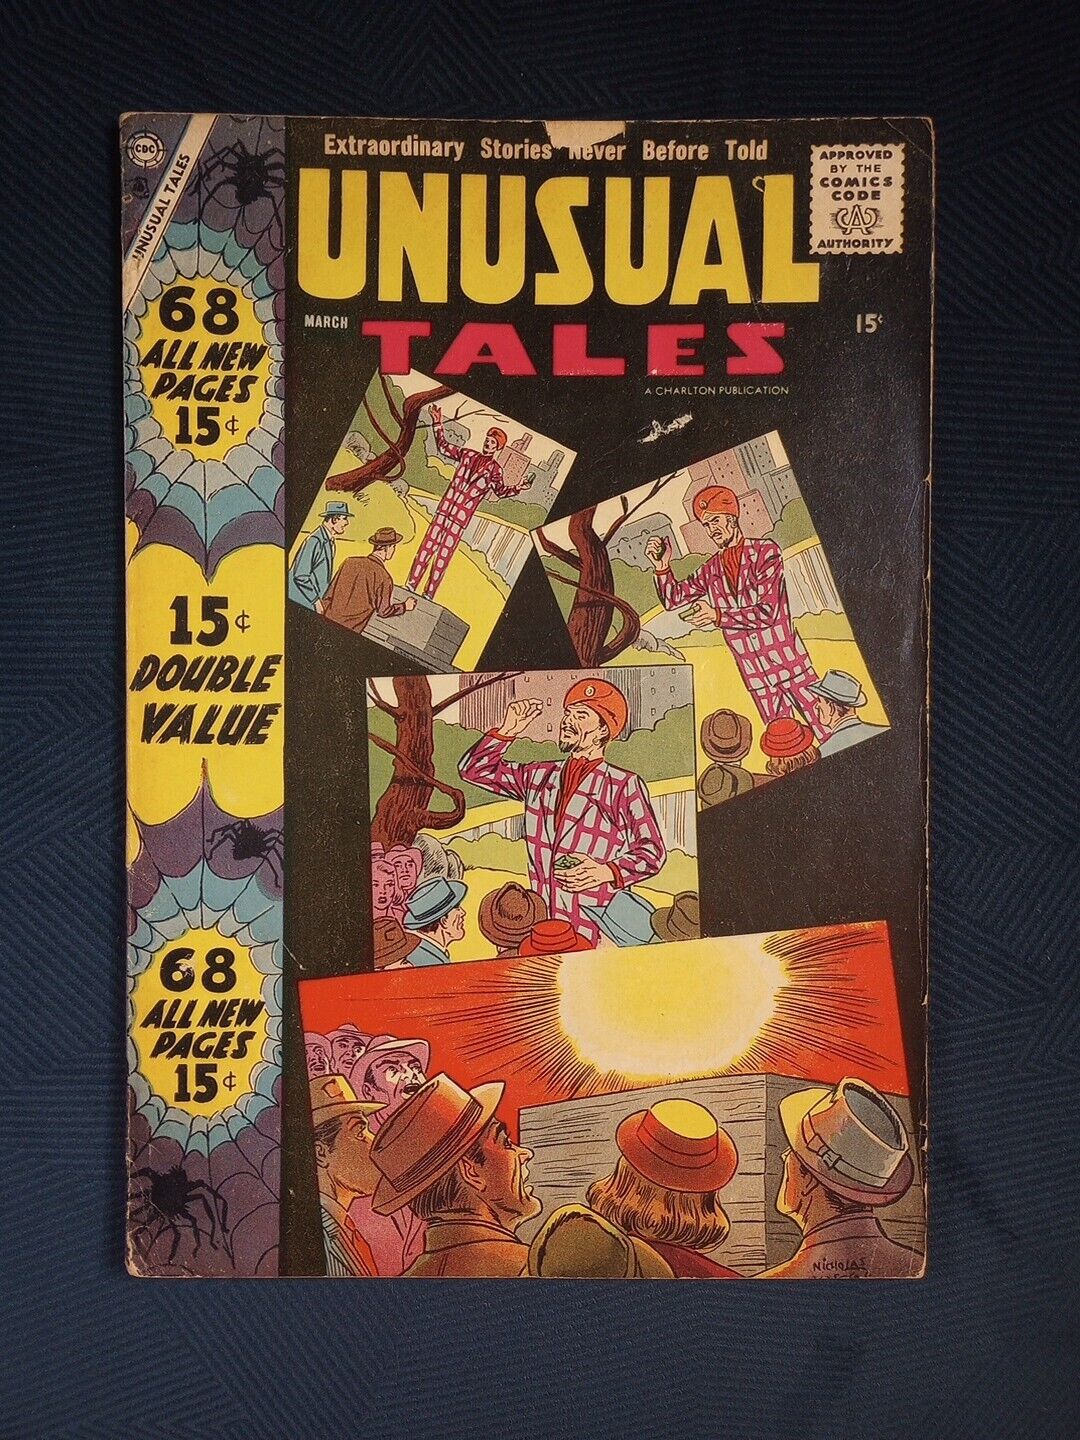 UNUSUAL TALES #11 (1958) VG/FN Giant 68 Pages - Early Steve Ditko - Rare HTF